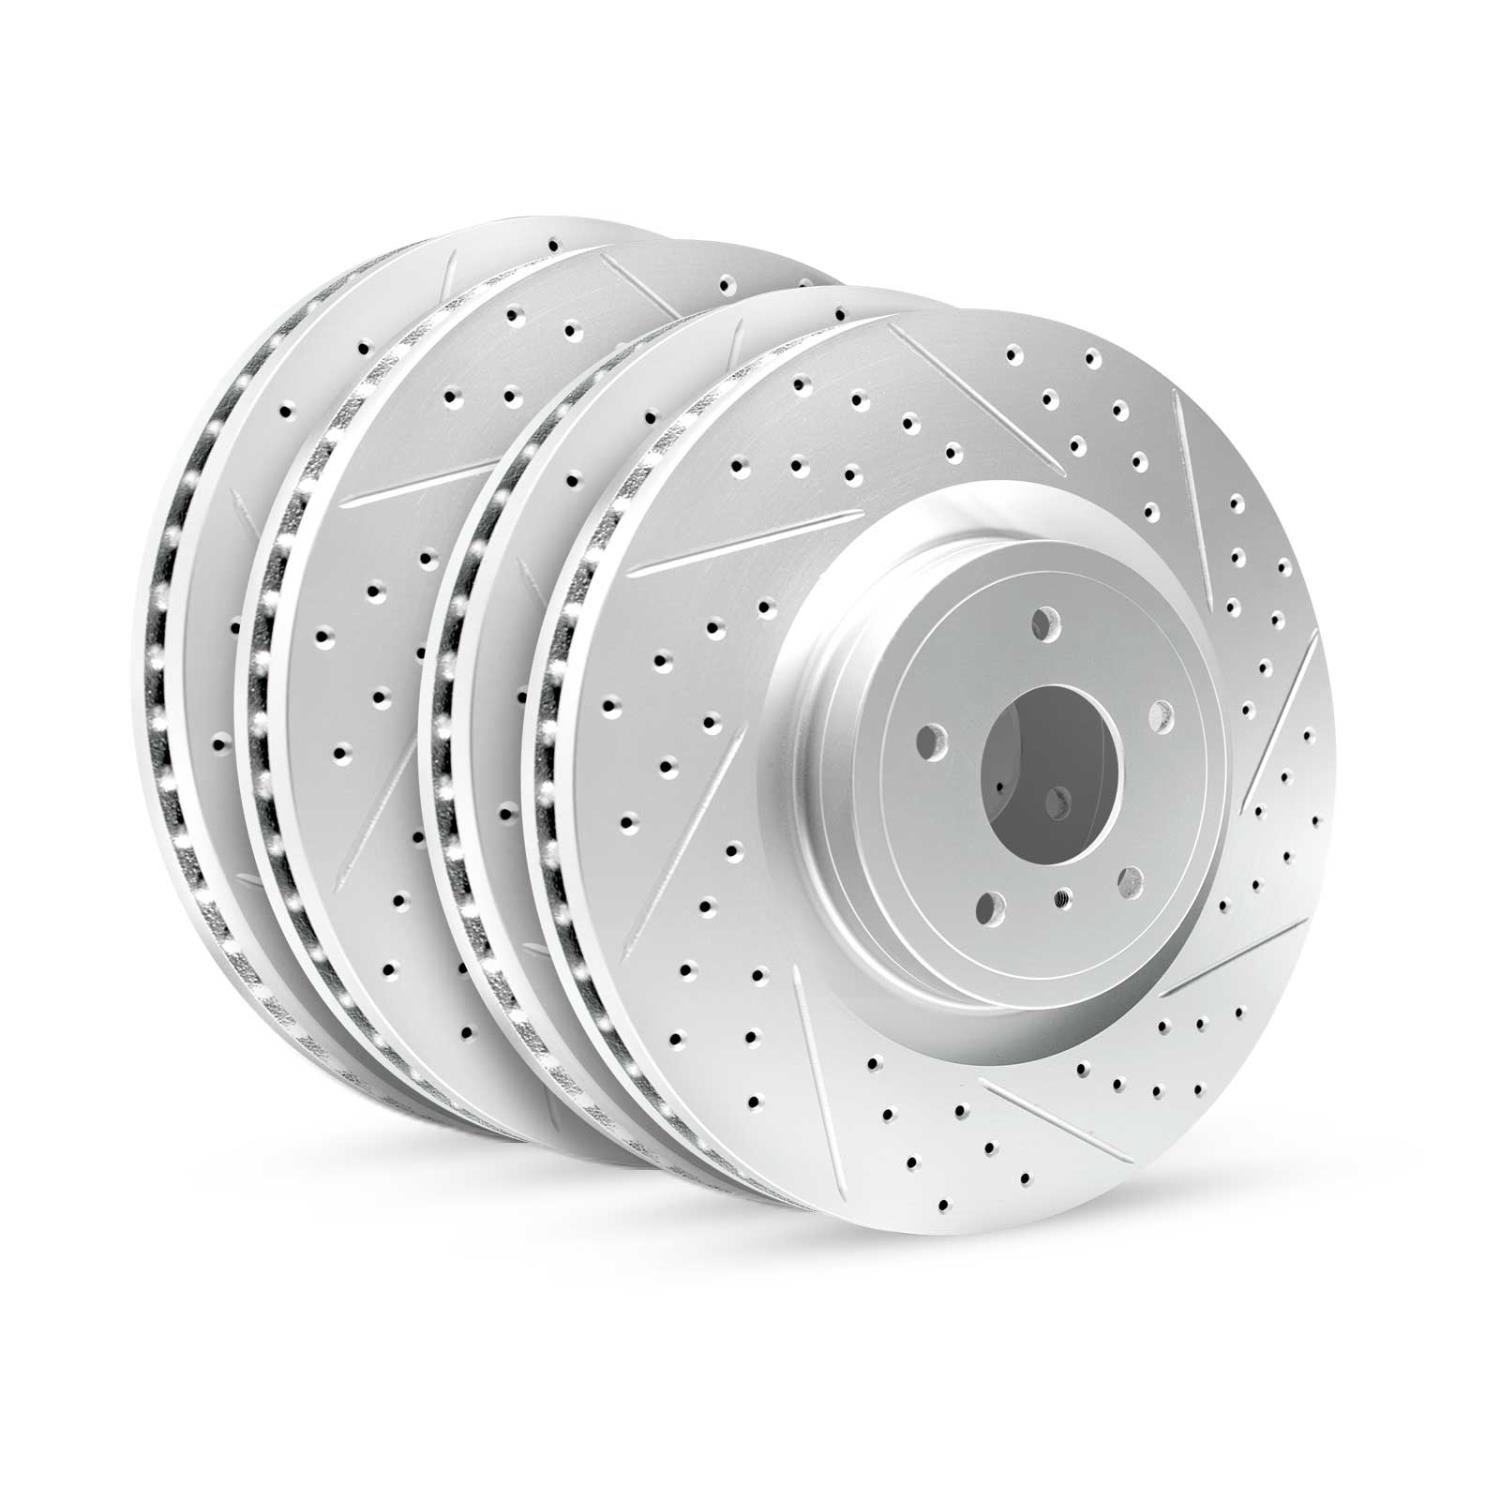 GEO-Carbon Drilled/Slotted Rotors, 2012-2018 Mercedes-Benz, Position: Front/Rear